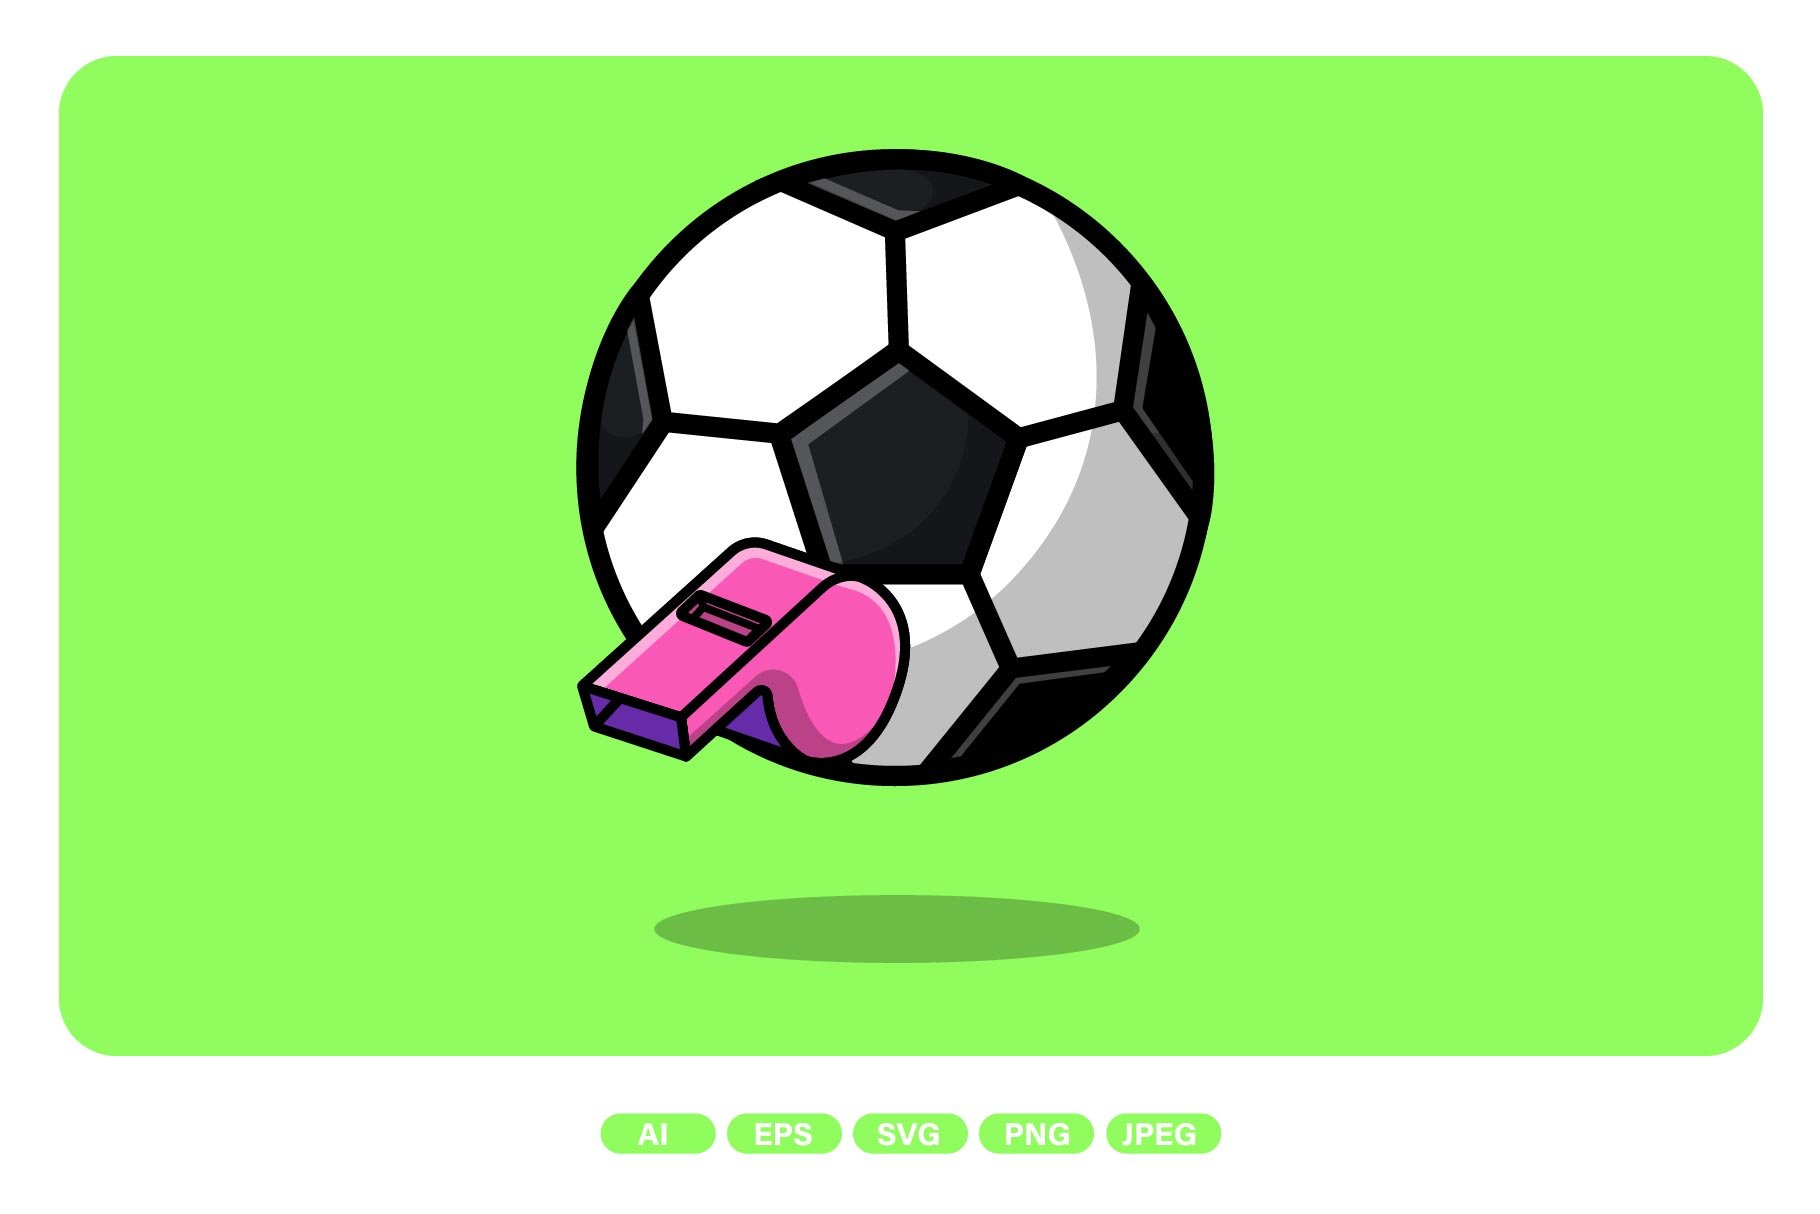 Soccer Ball And Whistle cover image.